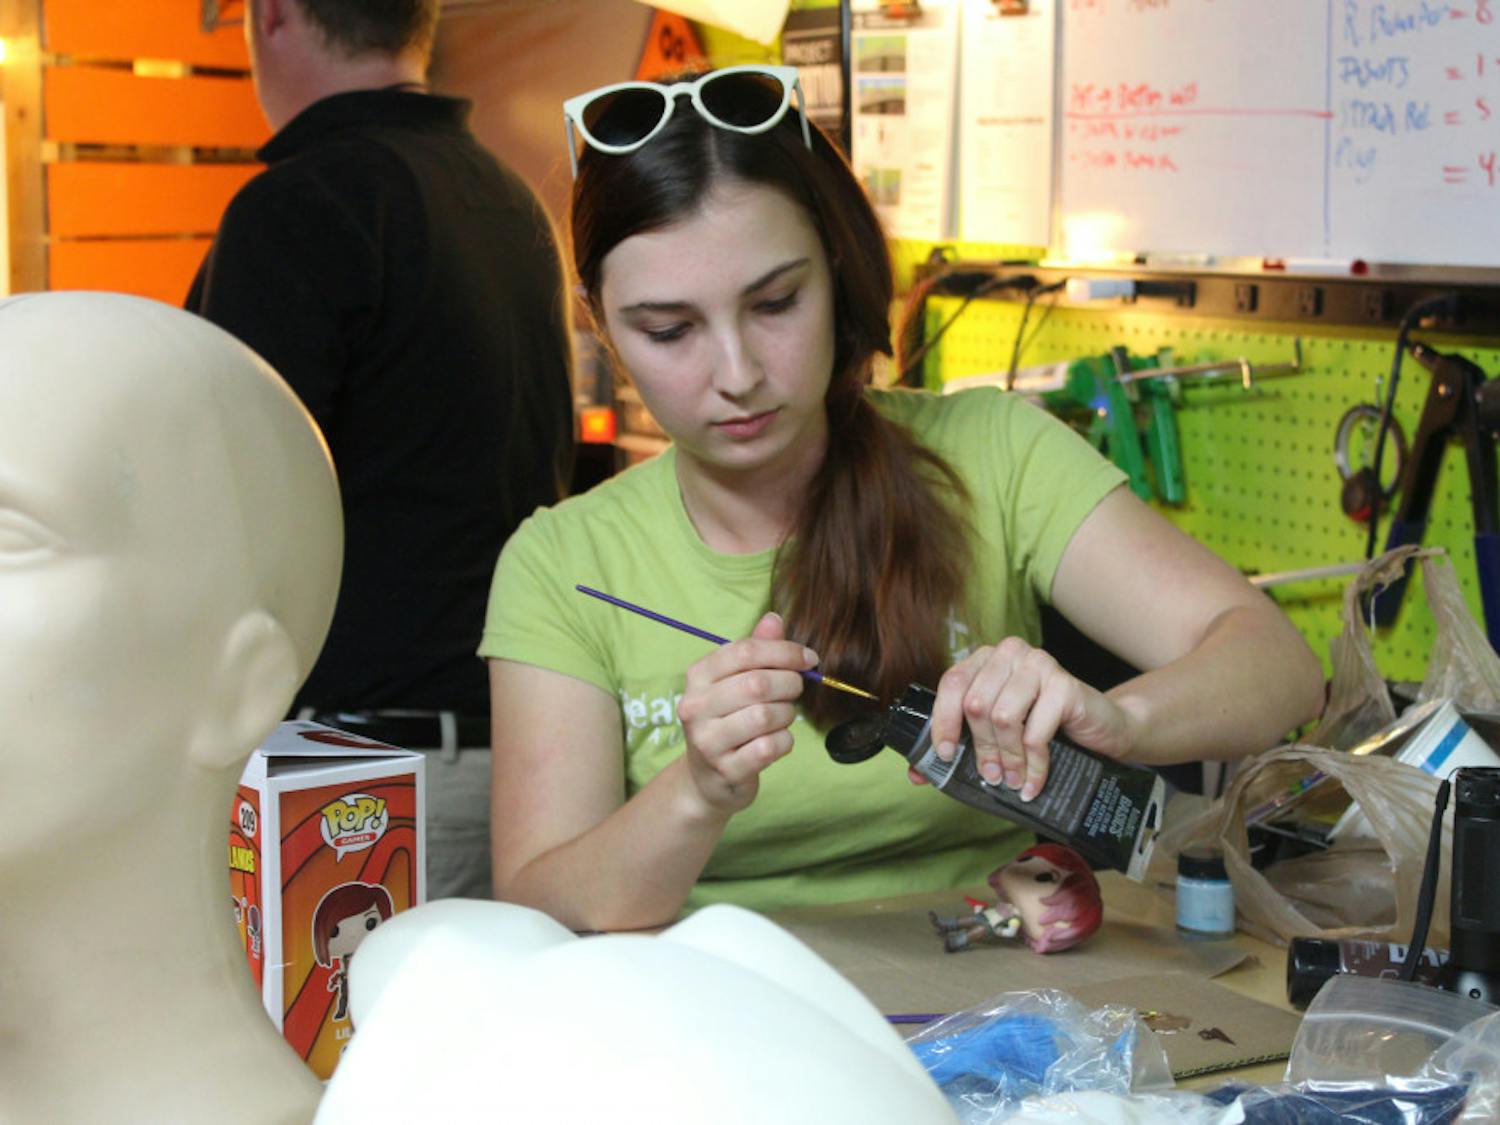 Jessica Hvozdovich, 24, repaints a figurine of Lilith from the video game "Borderlands 2." She was one of about 15 people who attended a cosplay workshop event at Hackerspace.